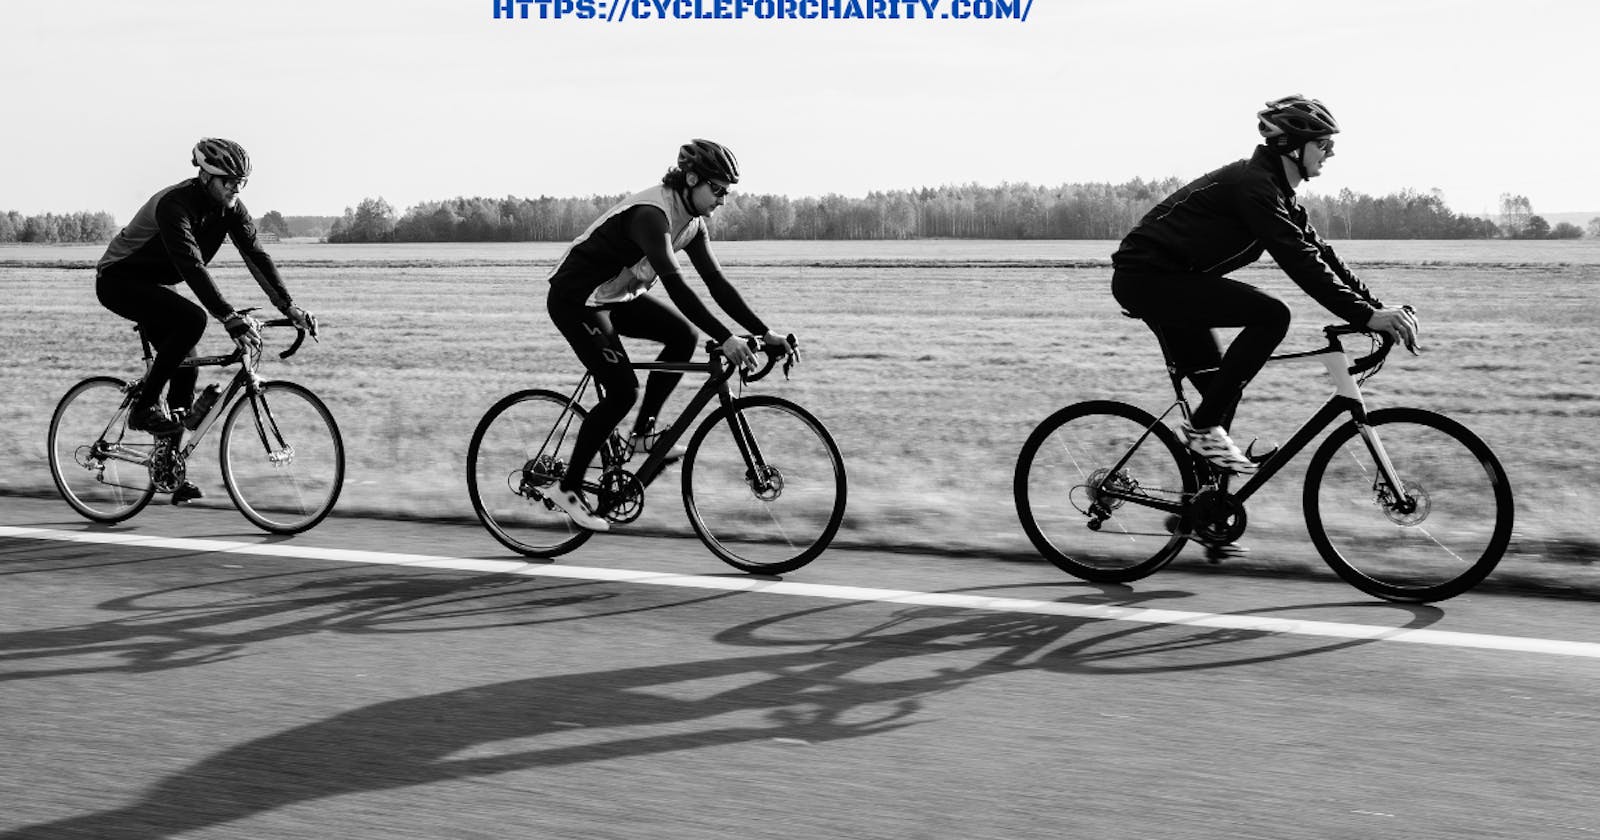 Pedaling for a Purpose: Join Our Bike Rides for Charity and Make a Difference